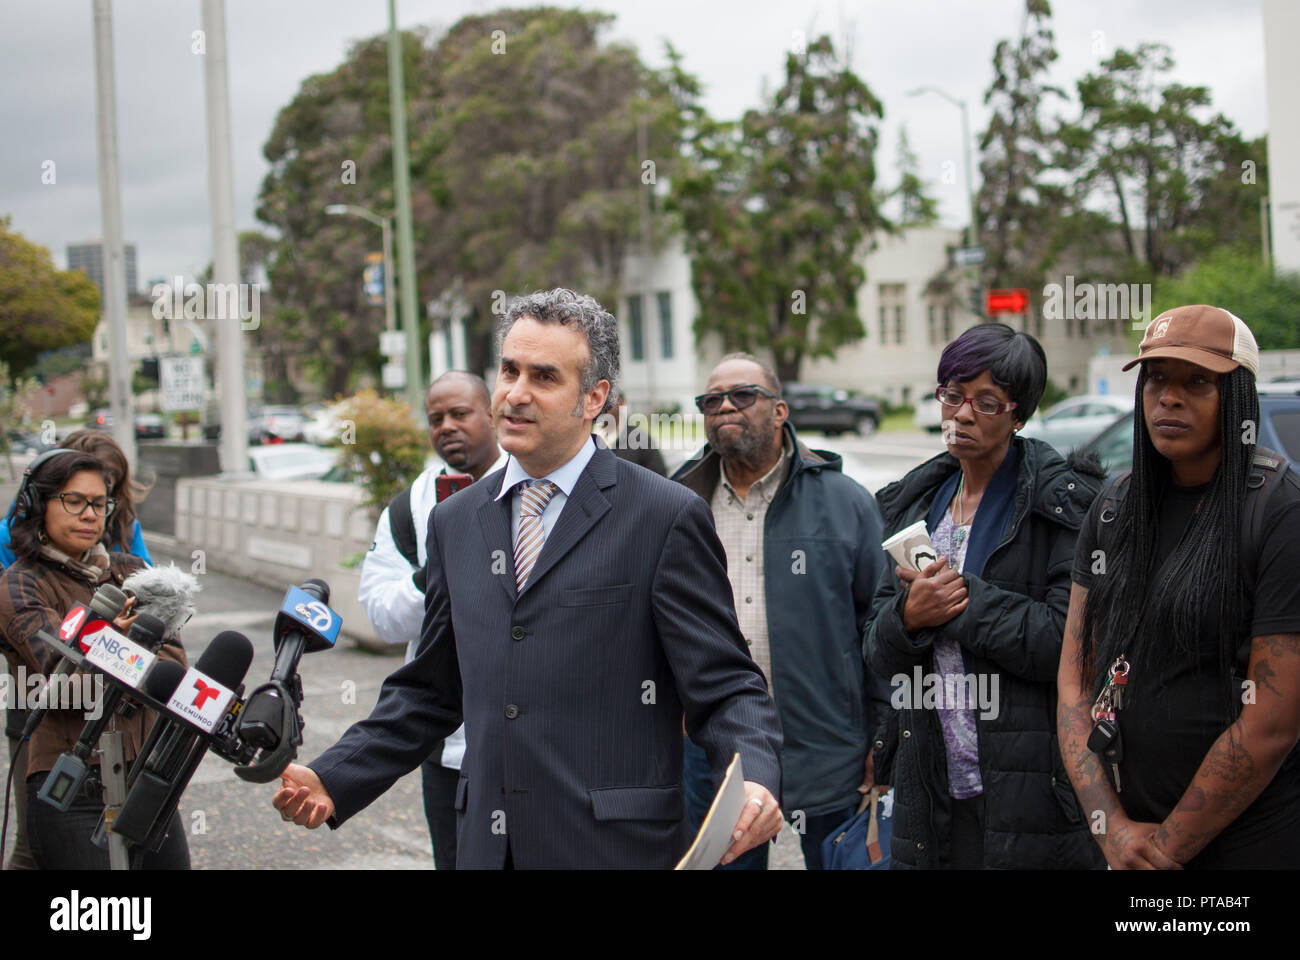 Attorney Ken Greenstein announces a lawsuit against the owners of a halfway house at 2551 San Pablo Ave., where a fire killed 4 people in March 2017. Stock Photo